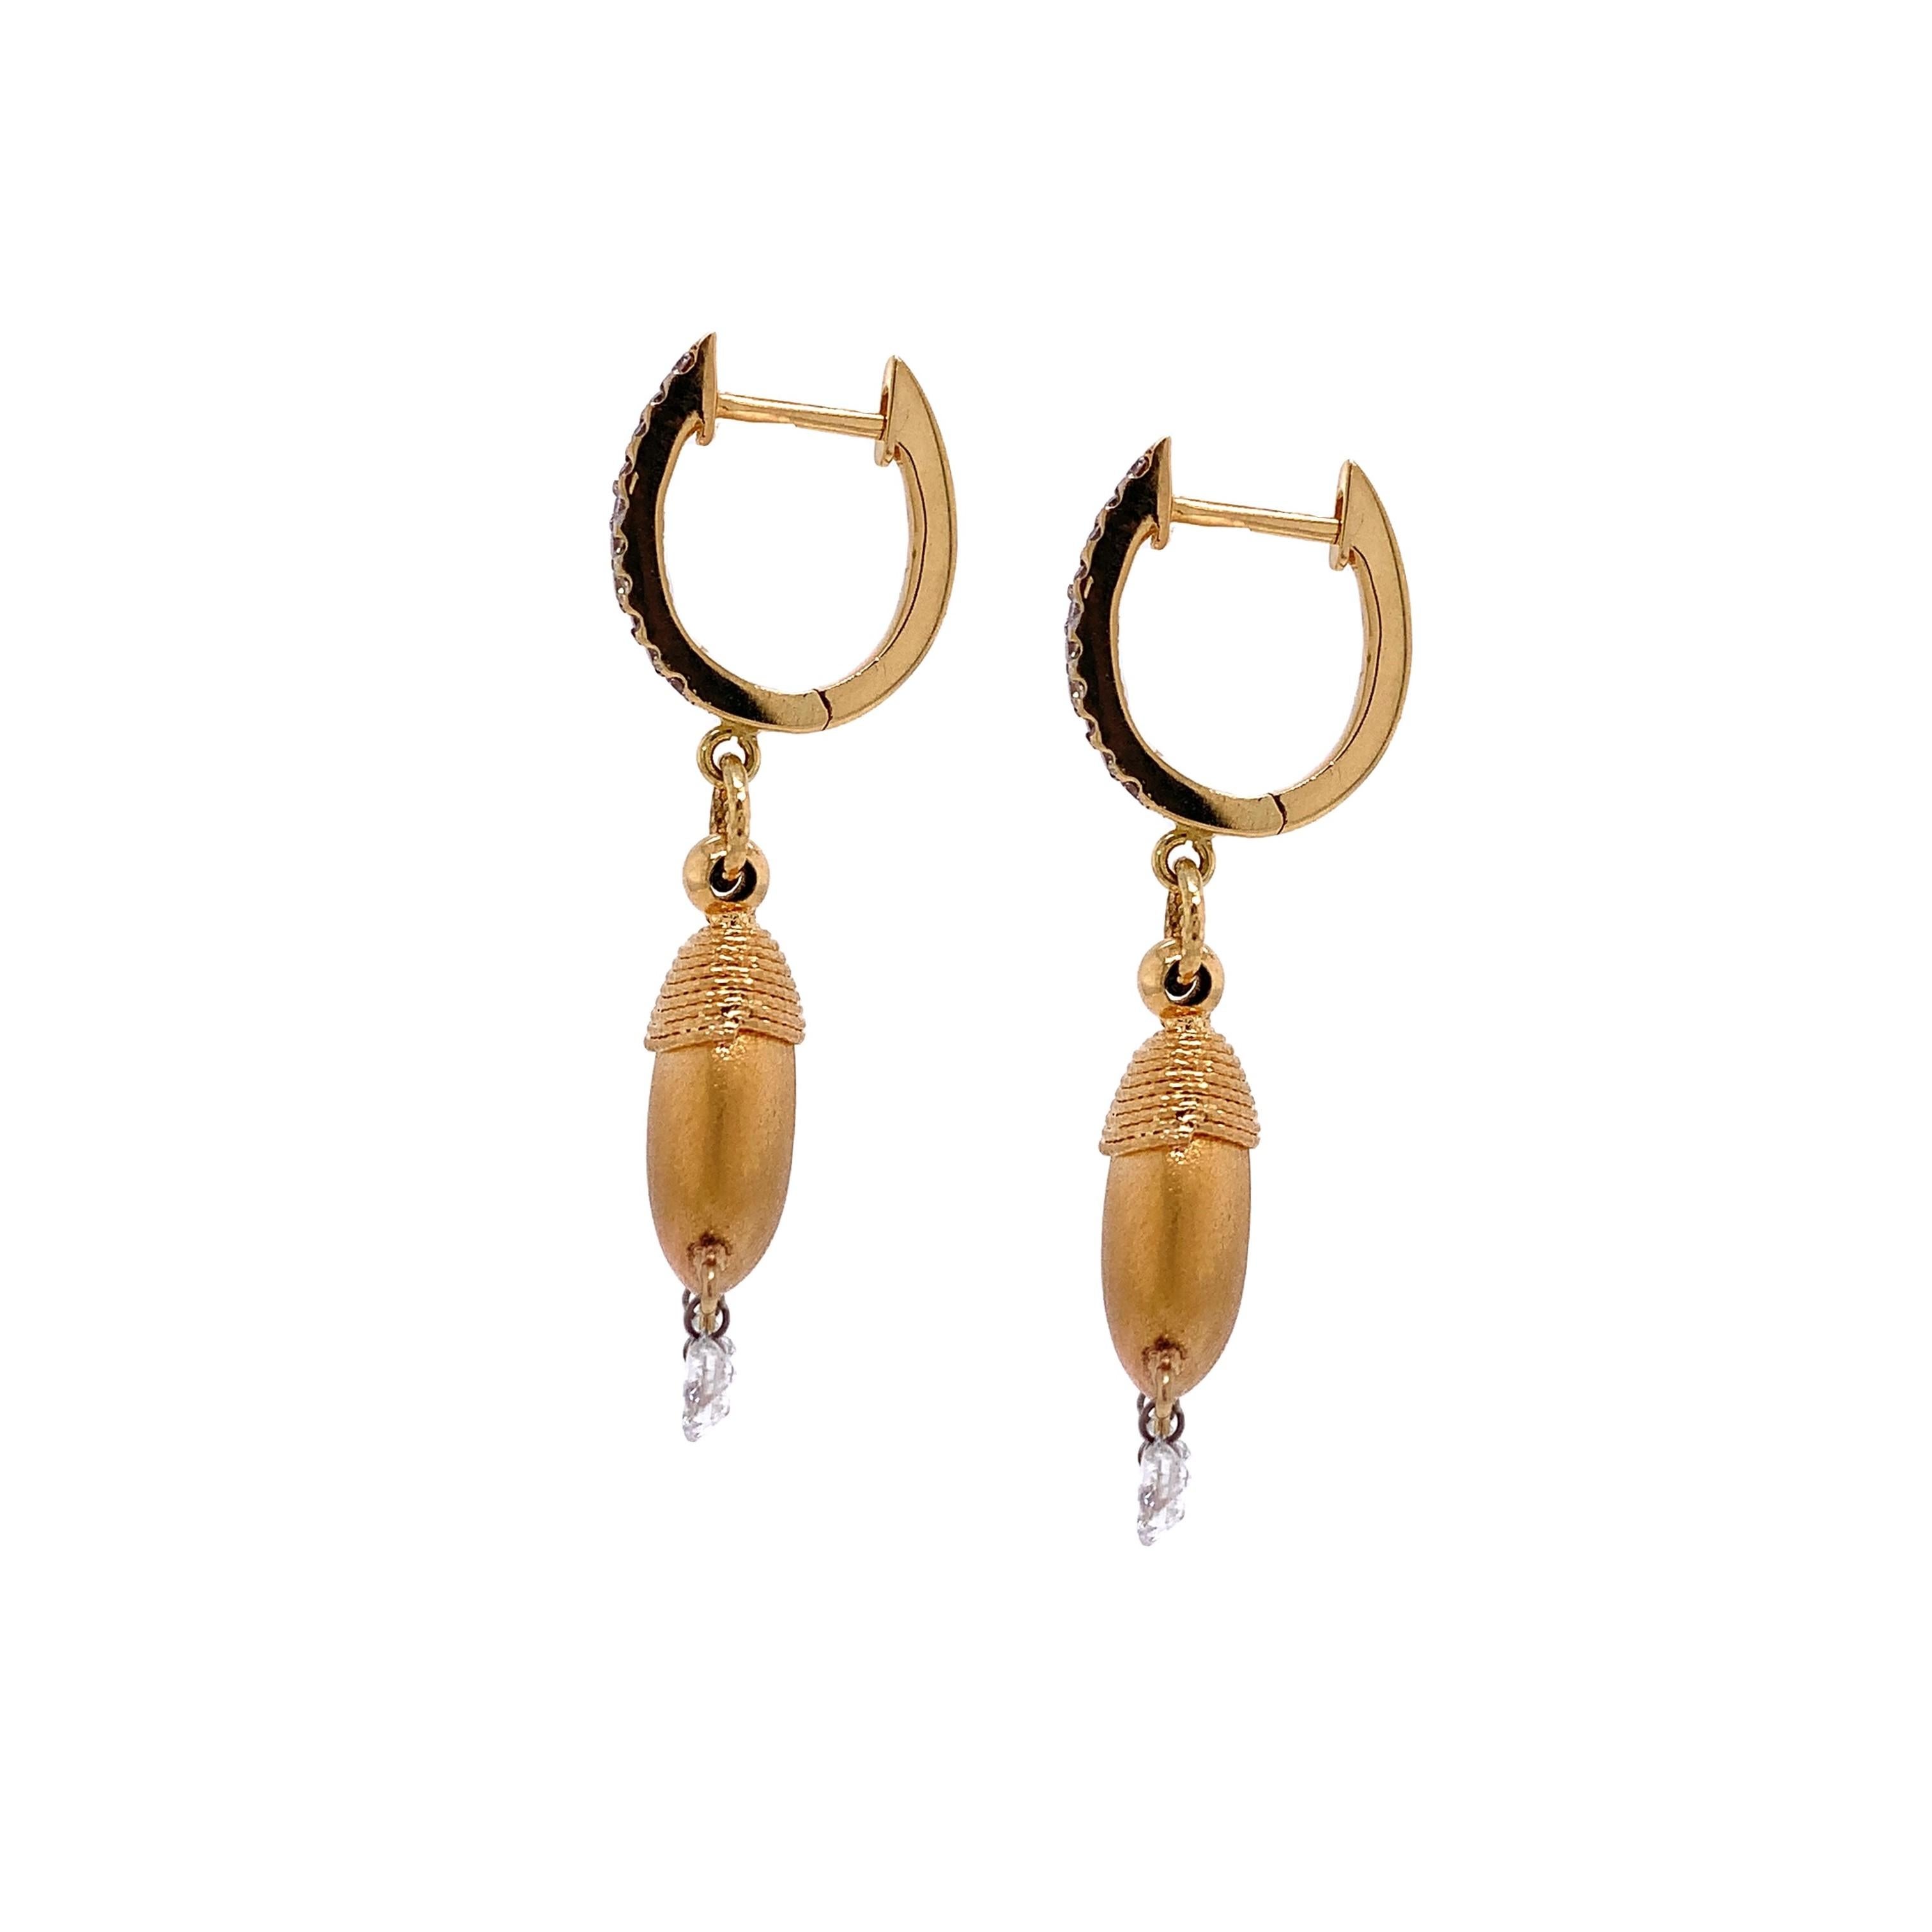 Dainty Collection

Yellow Gold drop earrings, each with 3 elegant brilliant cut round Diamonds totaling 0.71 carats dangling from gold mound with totaling 0.16 diamond huggies.